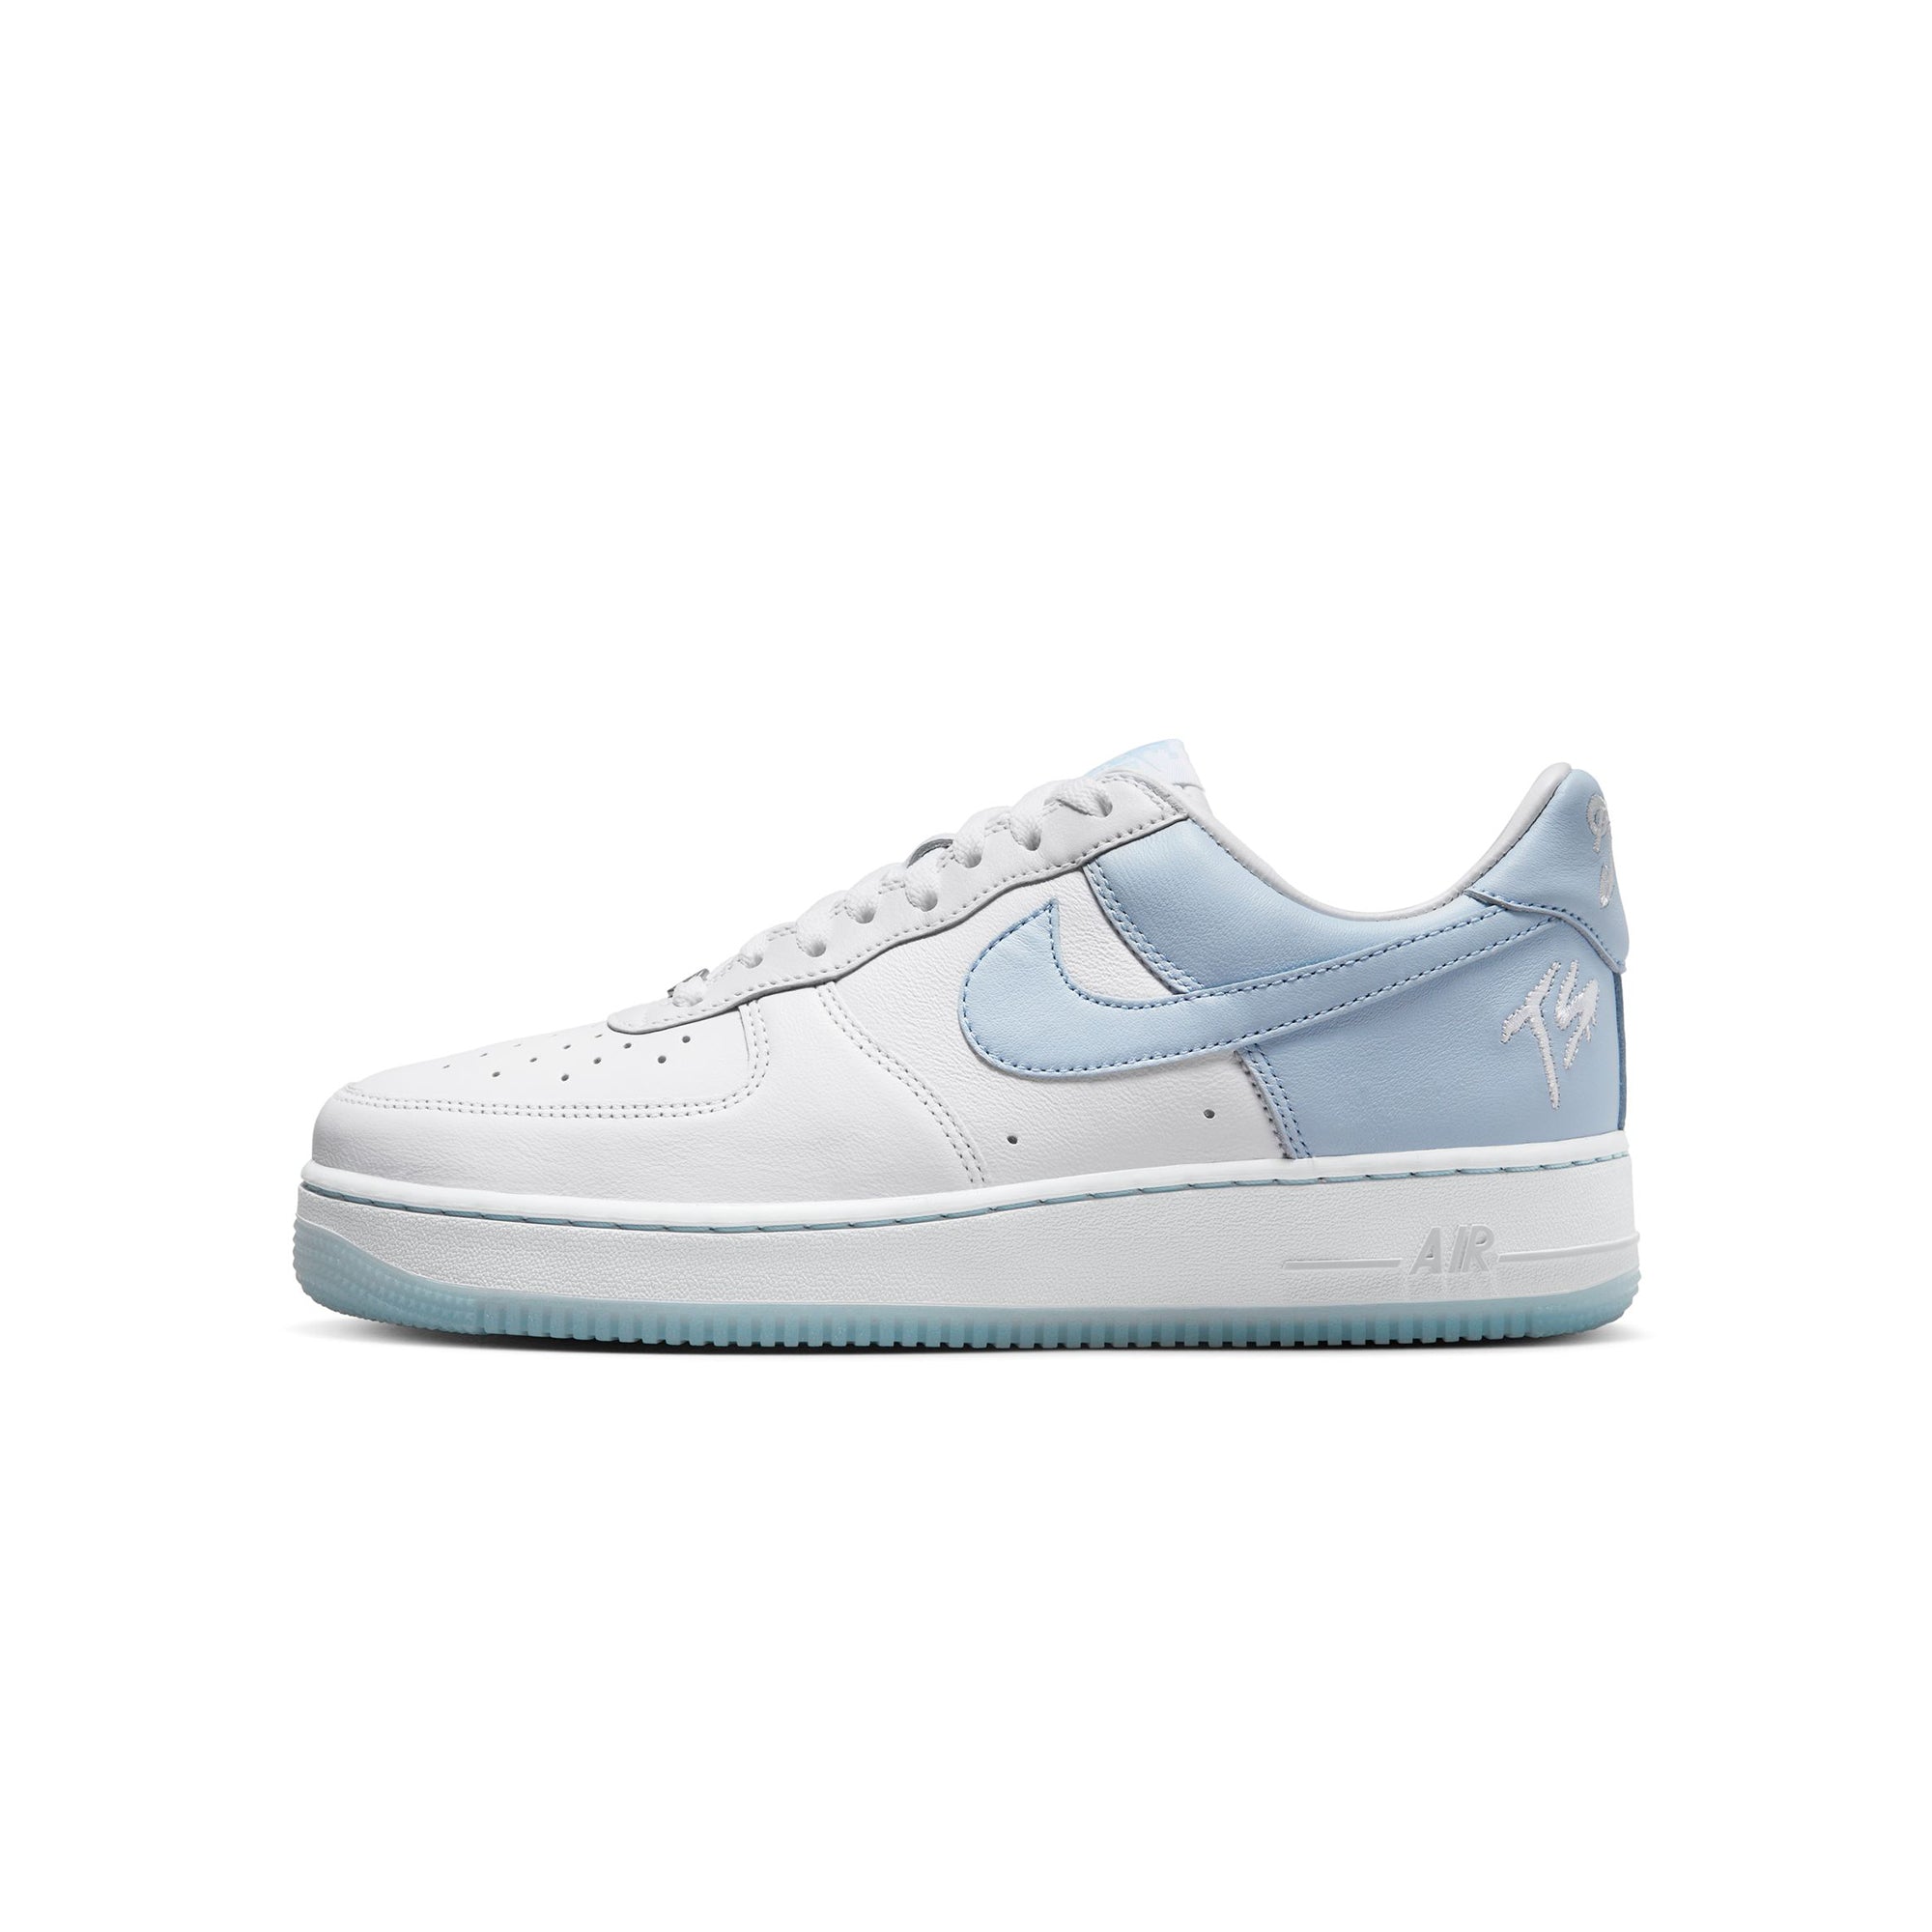 Nike x Terror Squad Air Force 1 Low QS Shoes – Extra Butter